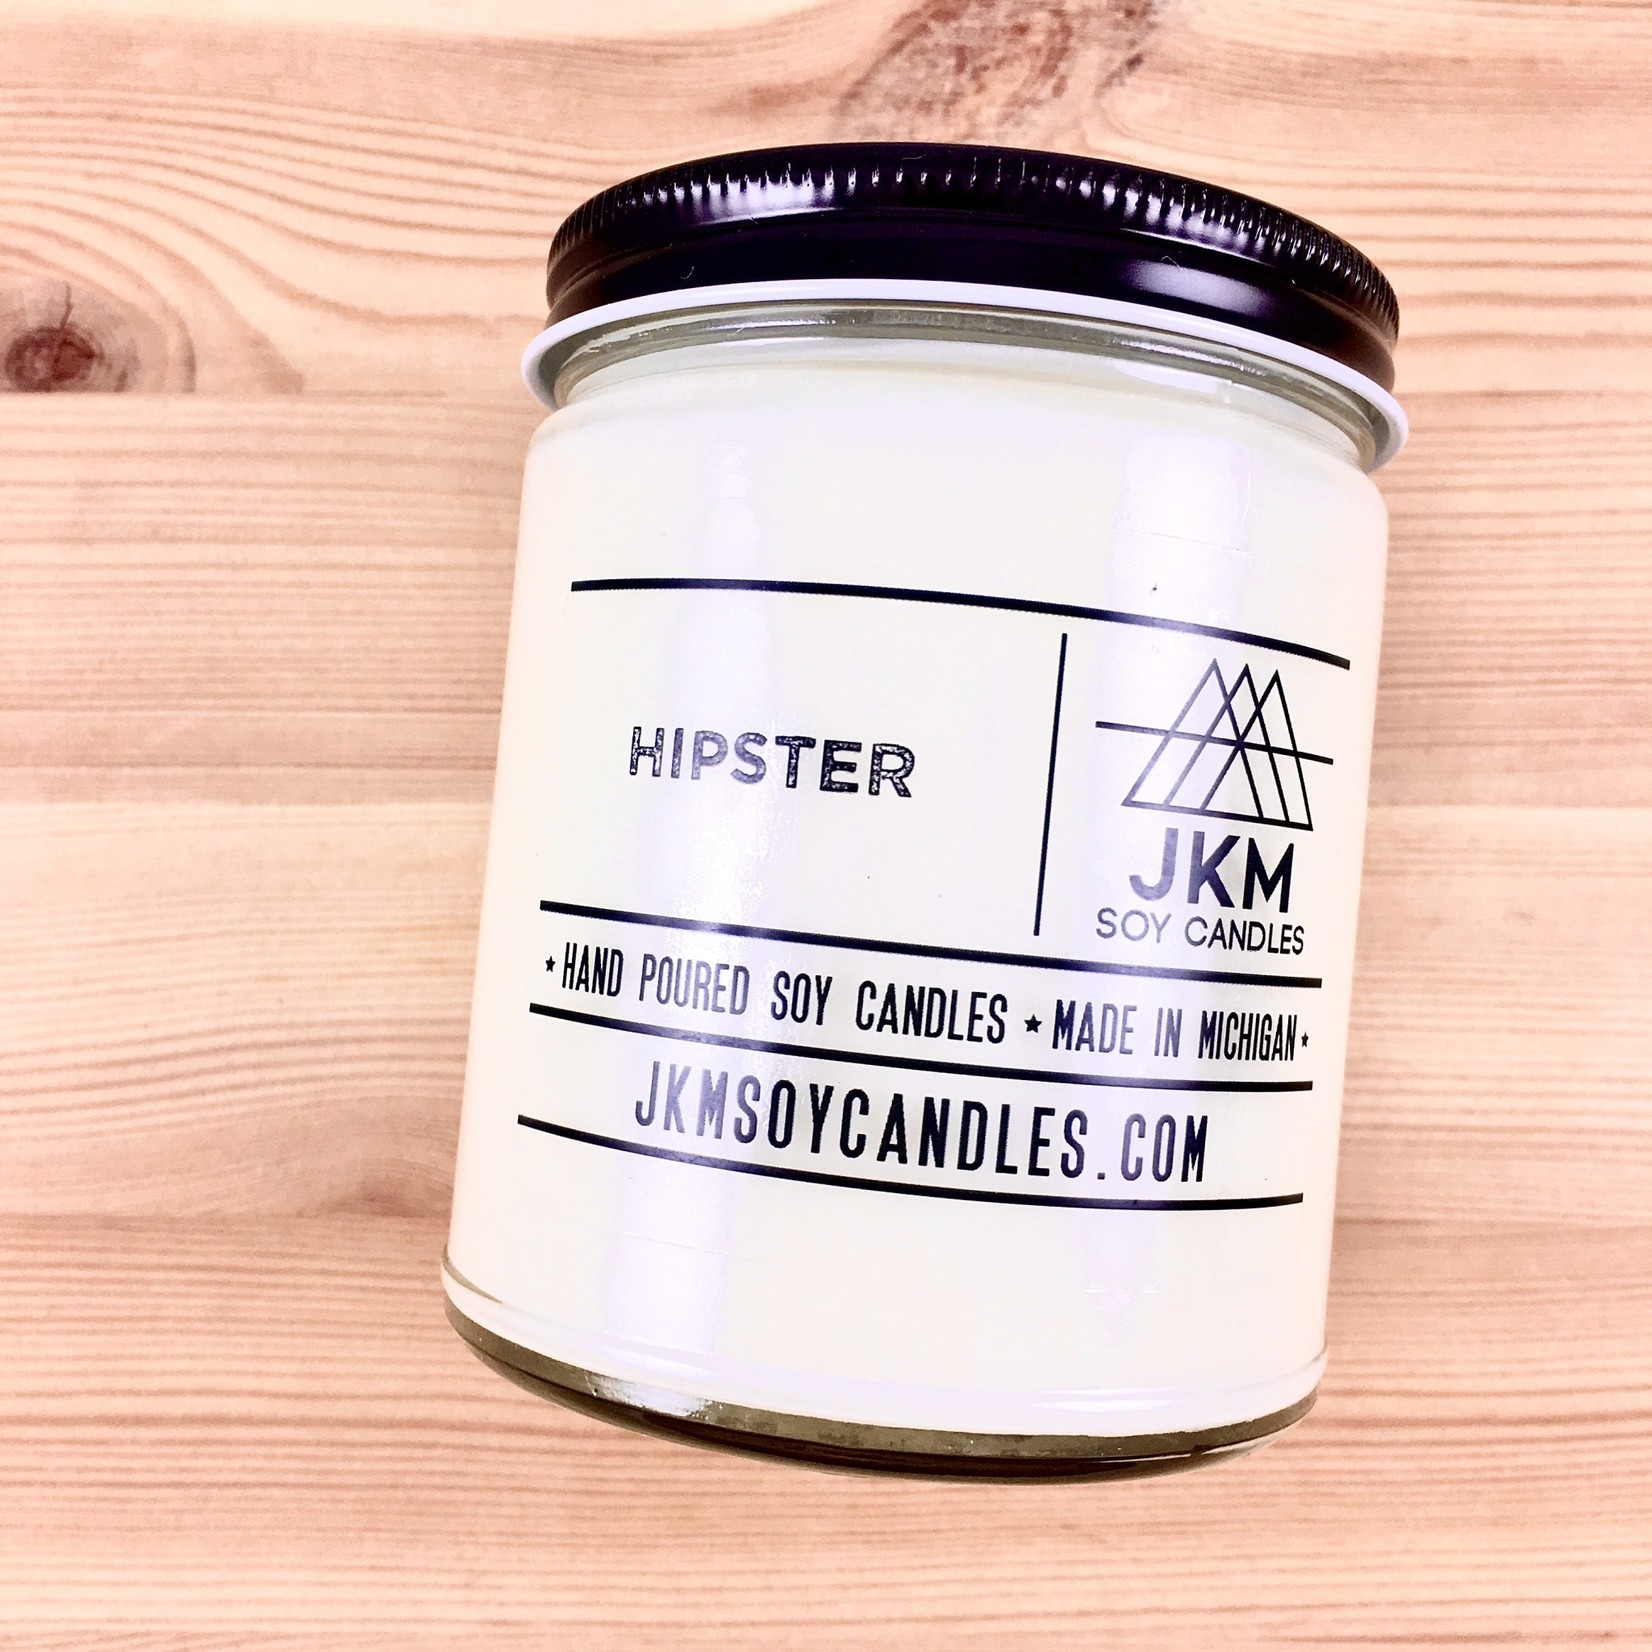 JKM Soy Candles BW: Hipster Soy Candle